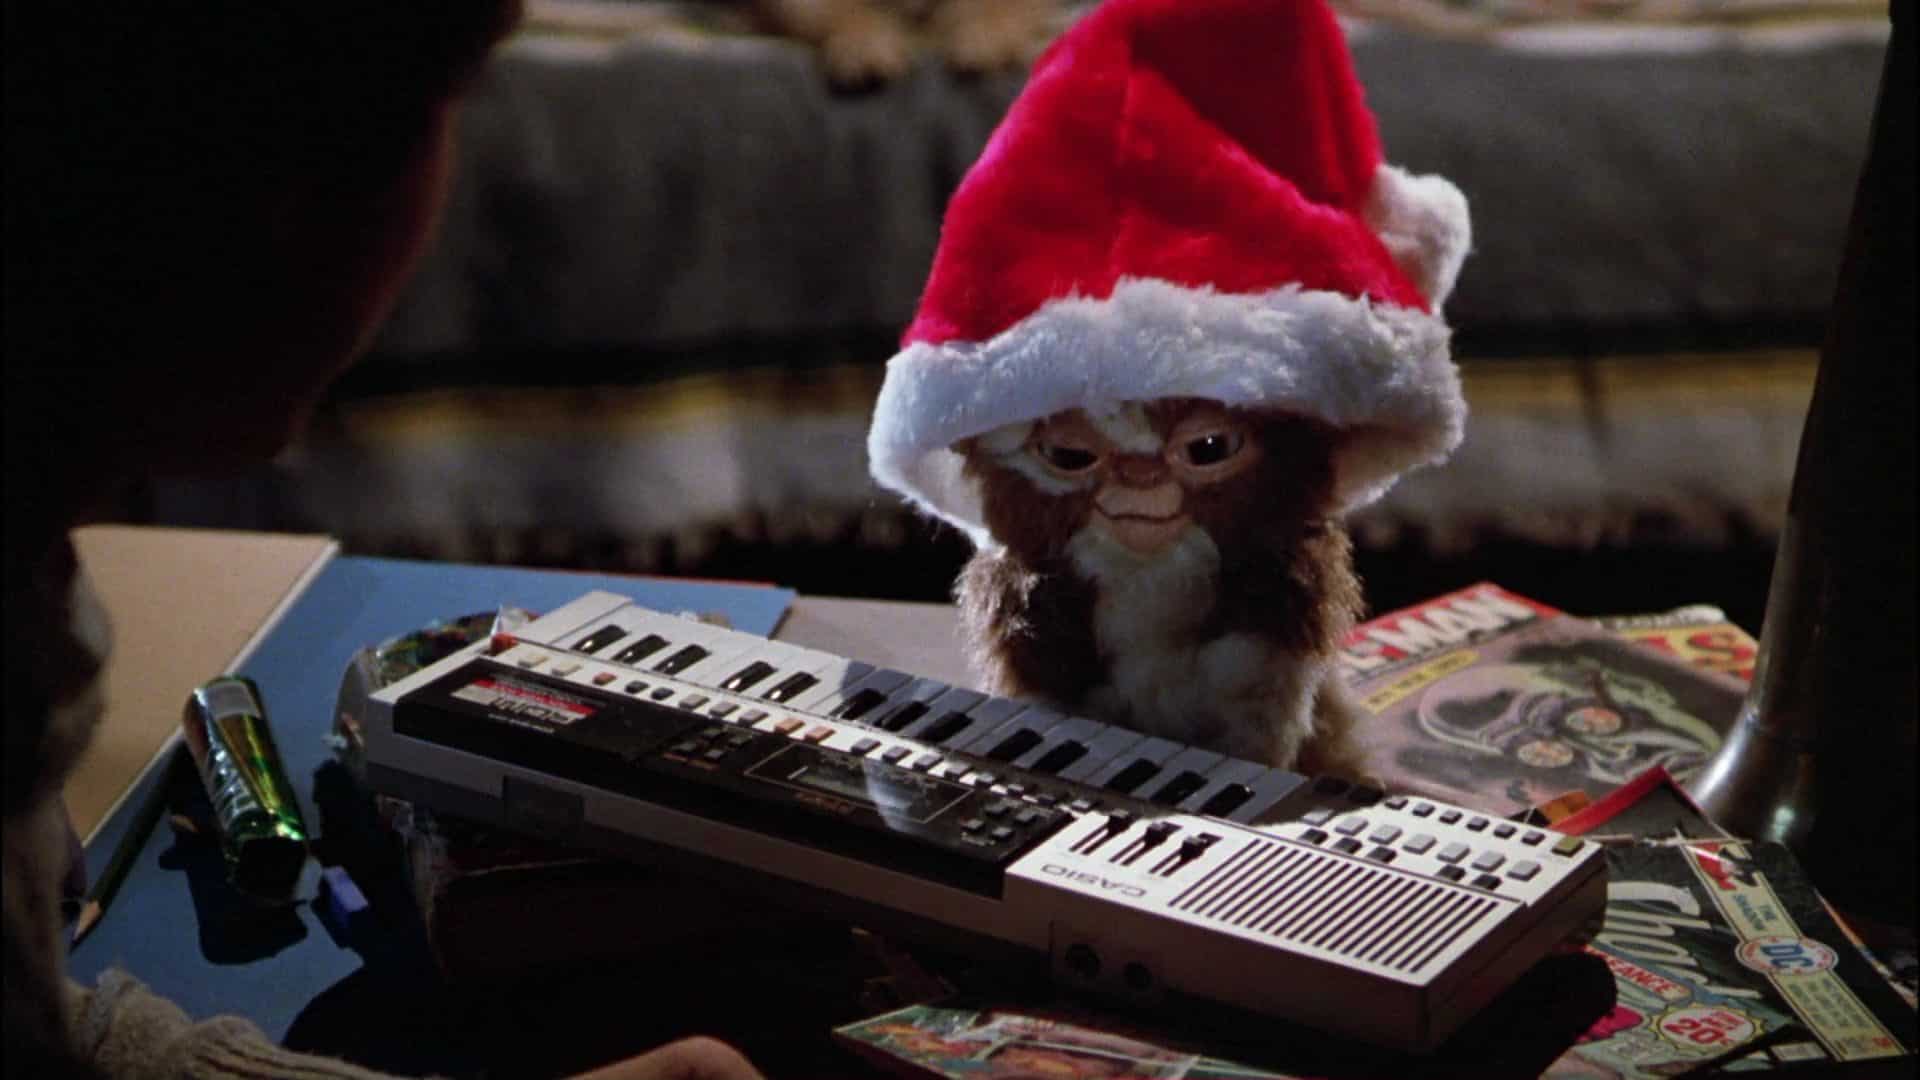 An animatronic gremlin in a Santa hat at a keyboard in this image from Warner Bros.